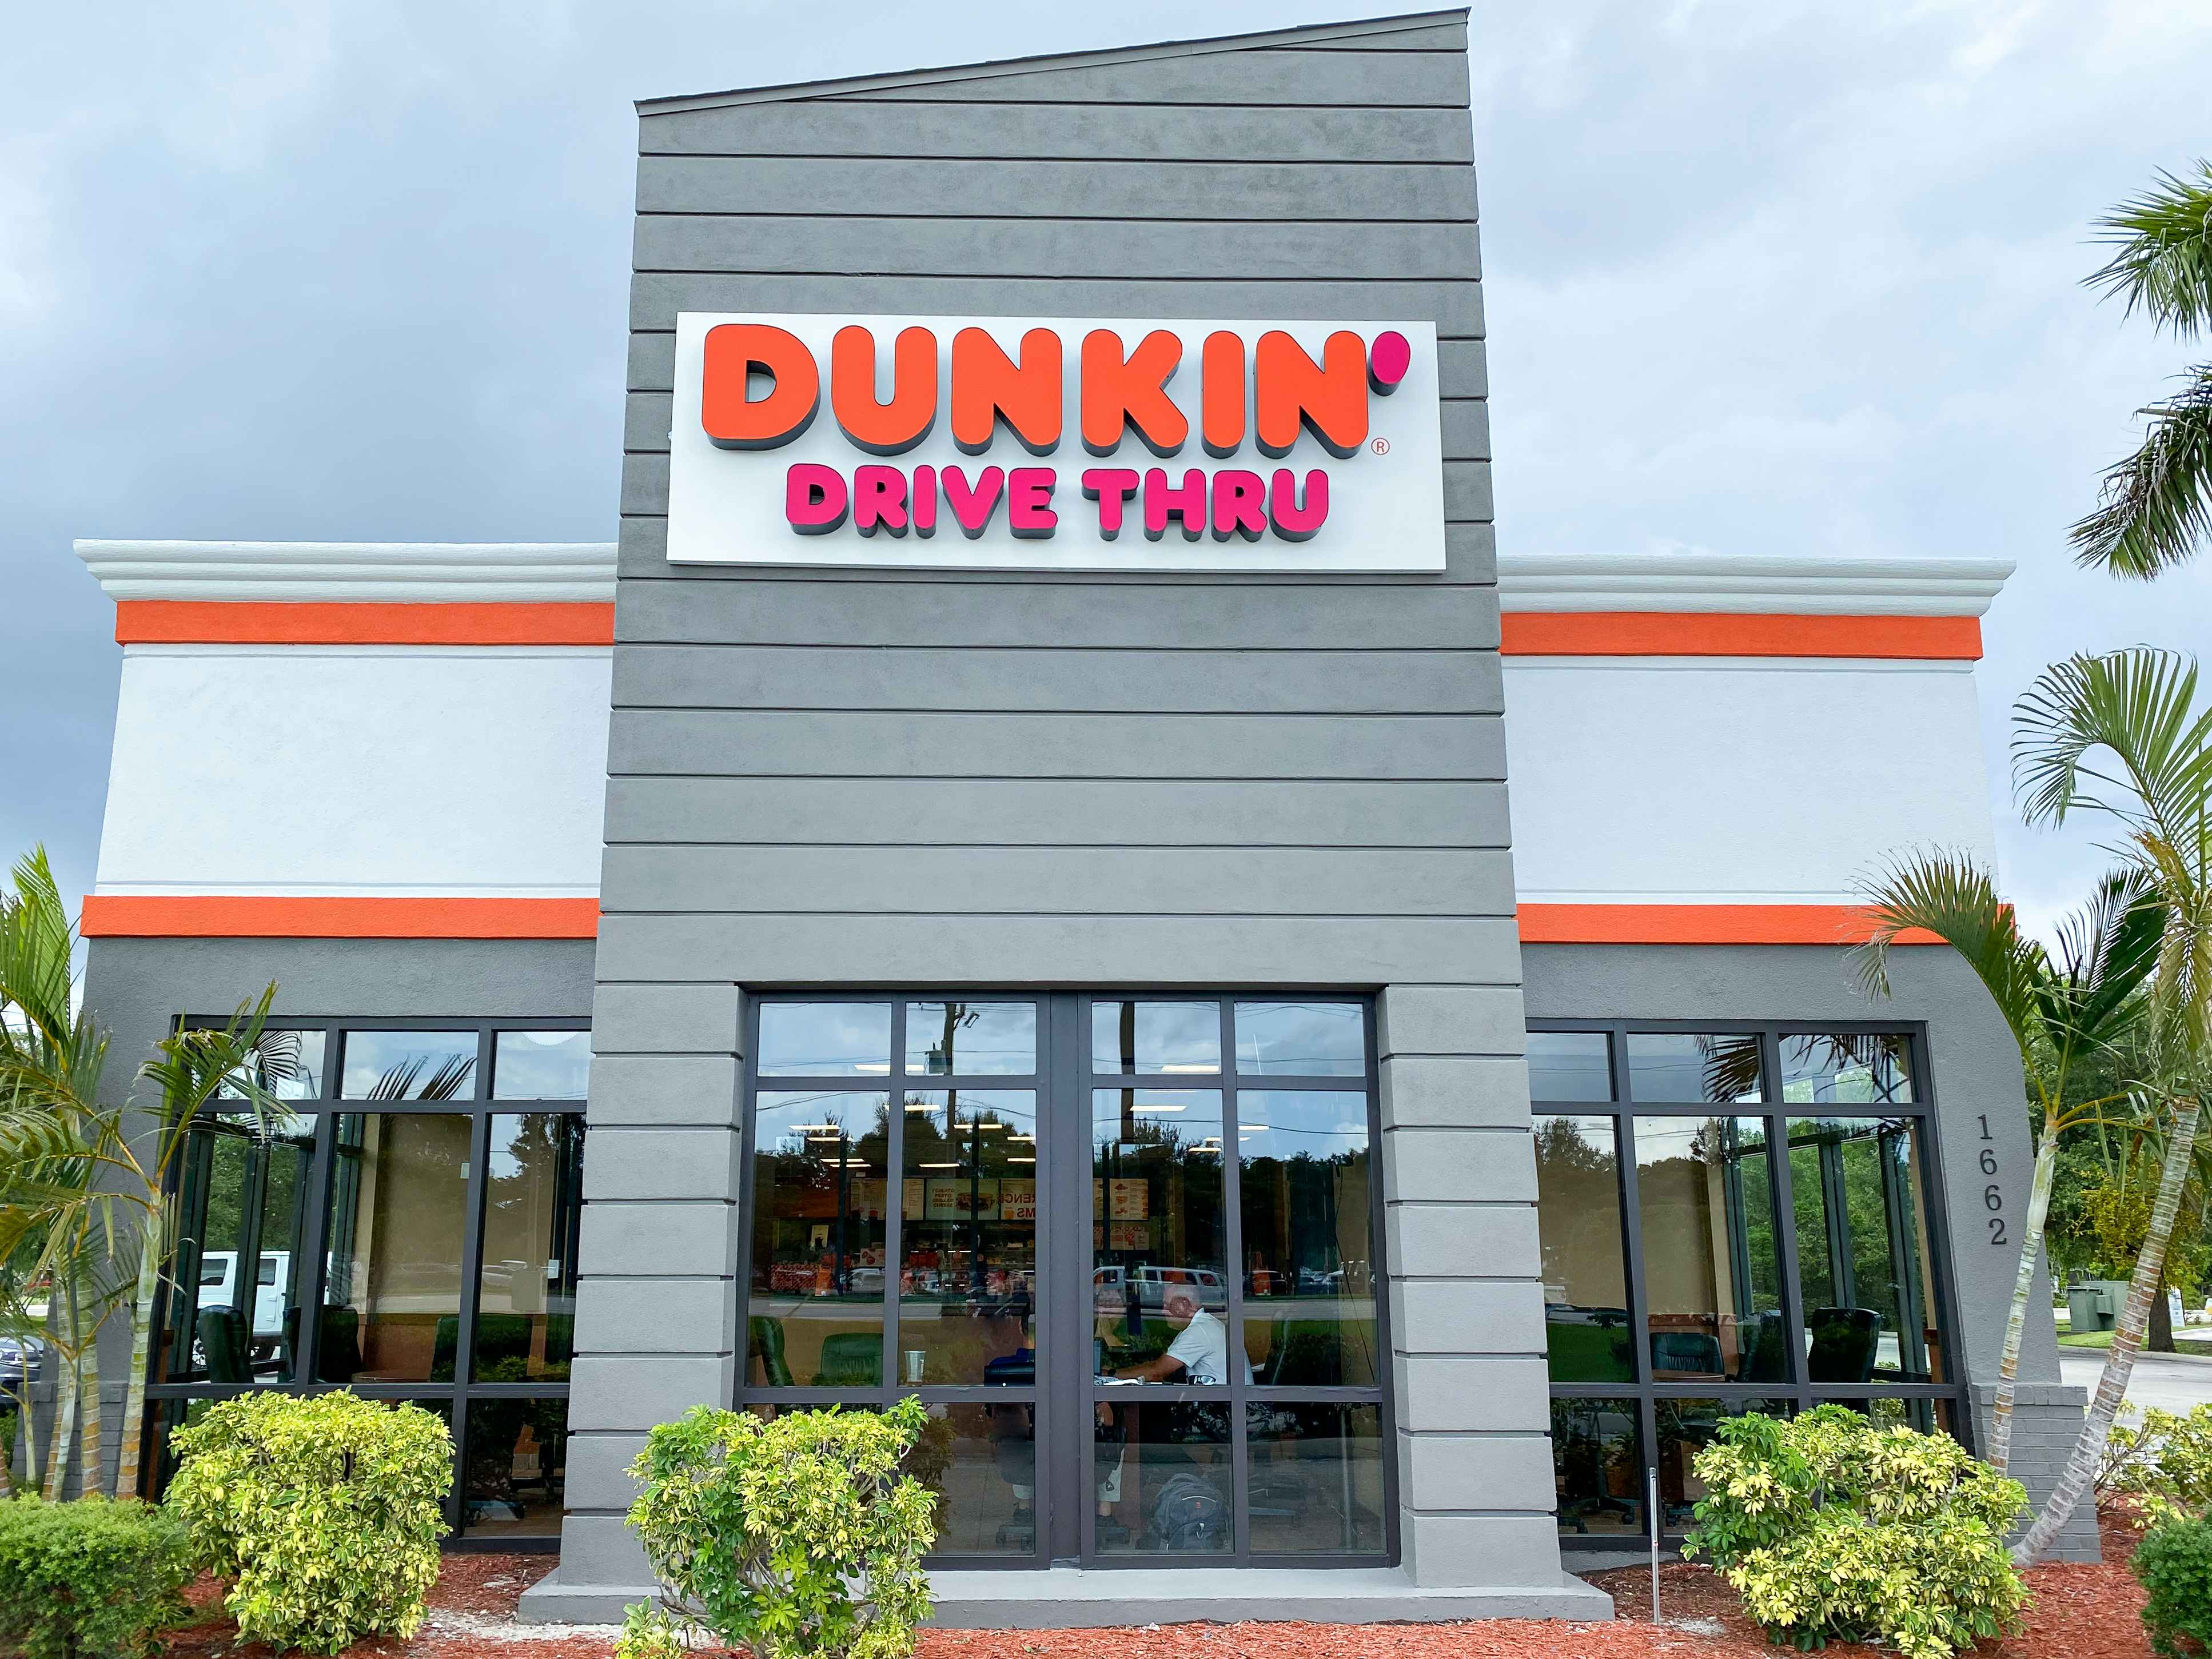 A Dunkin storefront during the day time in Florida.